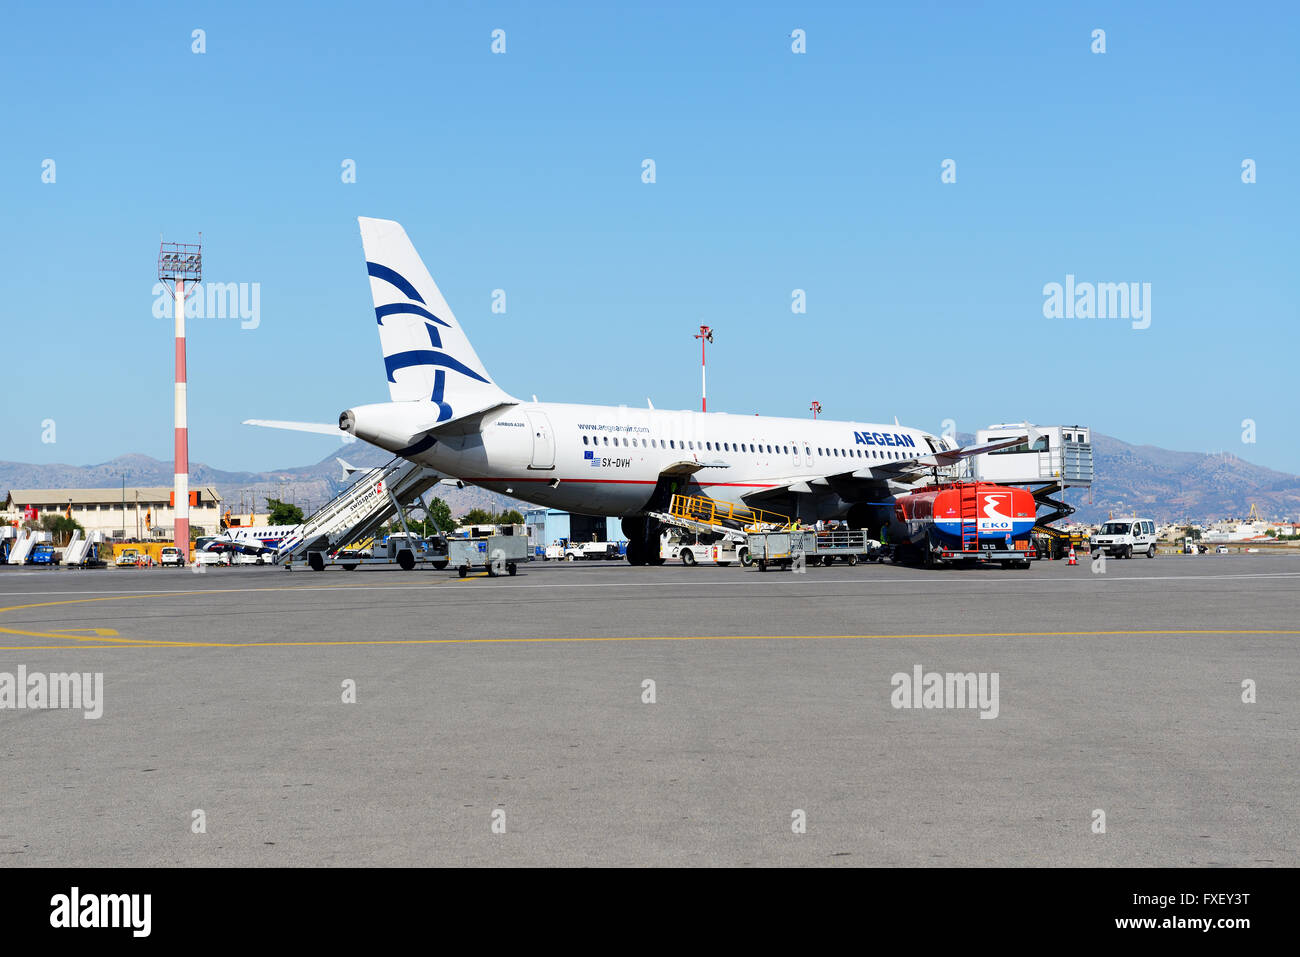 The aircraft of Aegean Airlines taking maintenance at Iraklion Airport, Greece Stock Photo